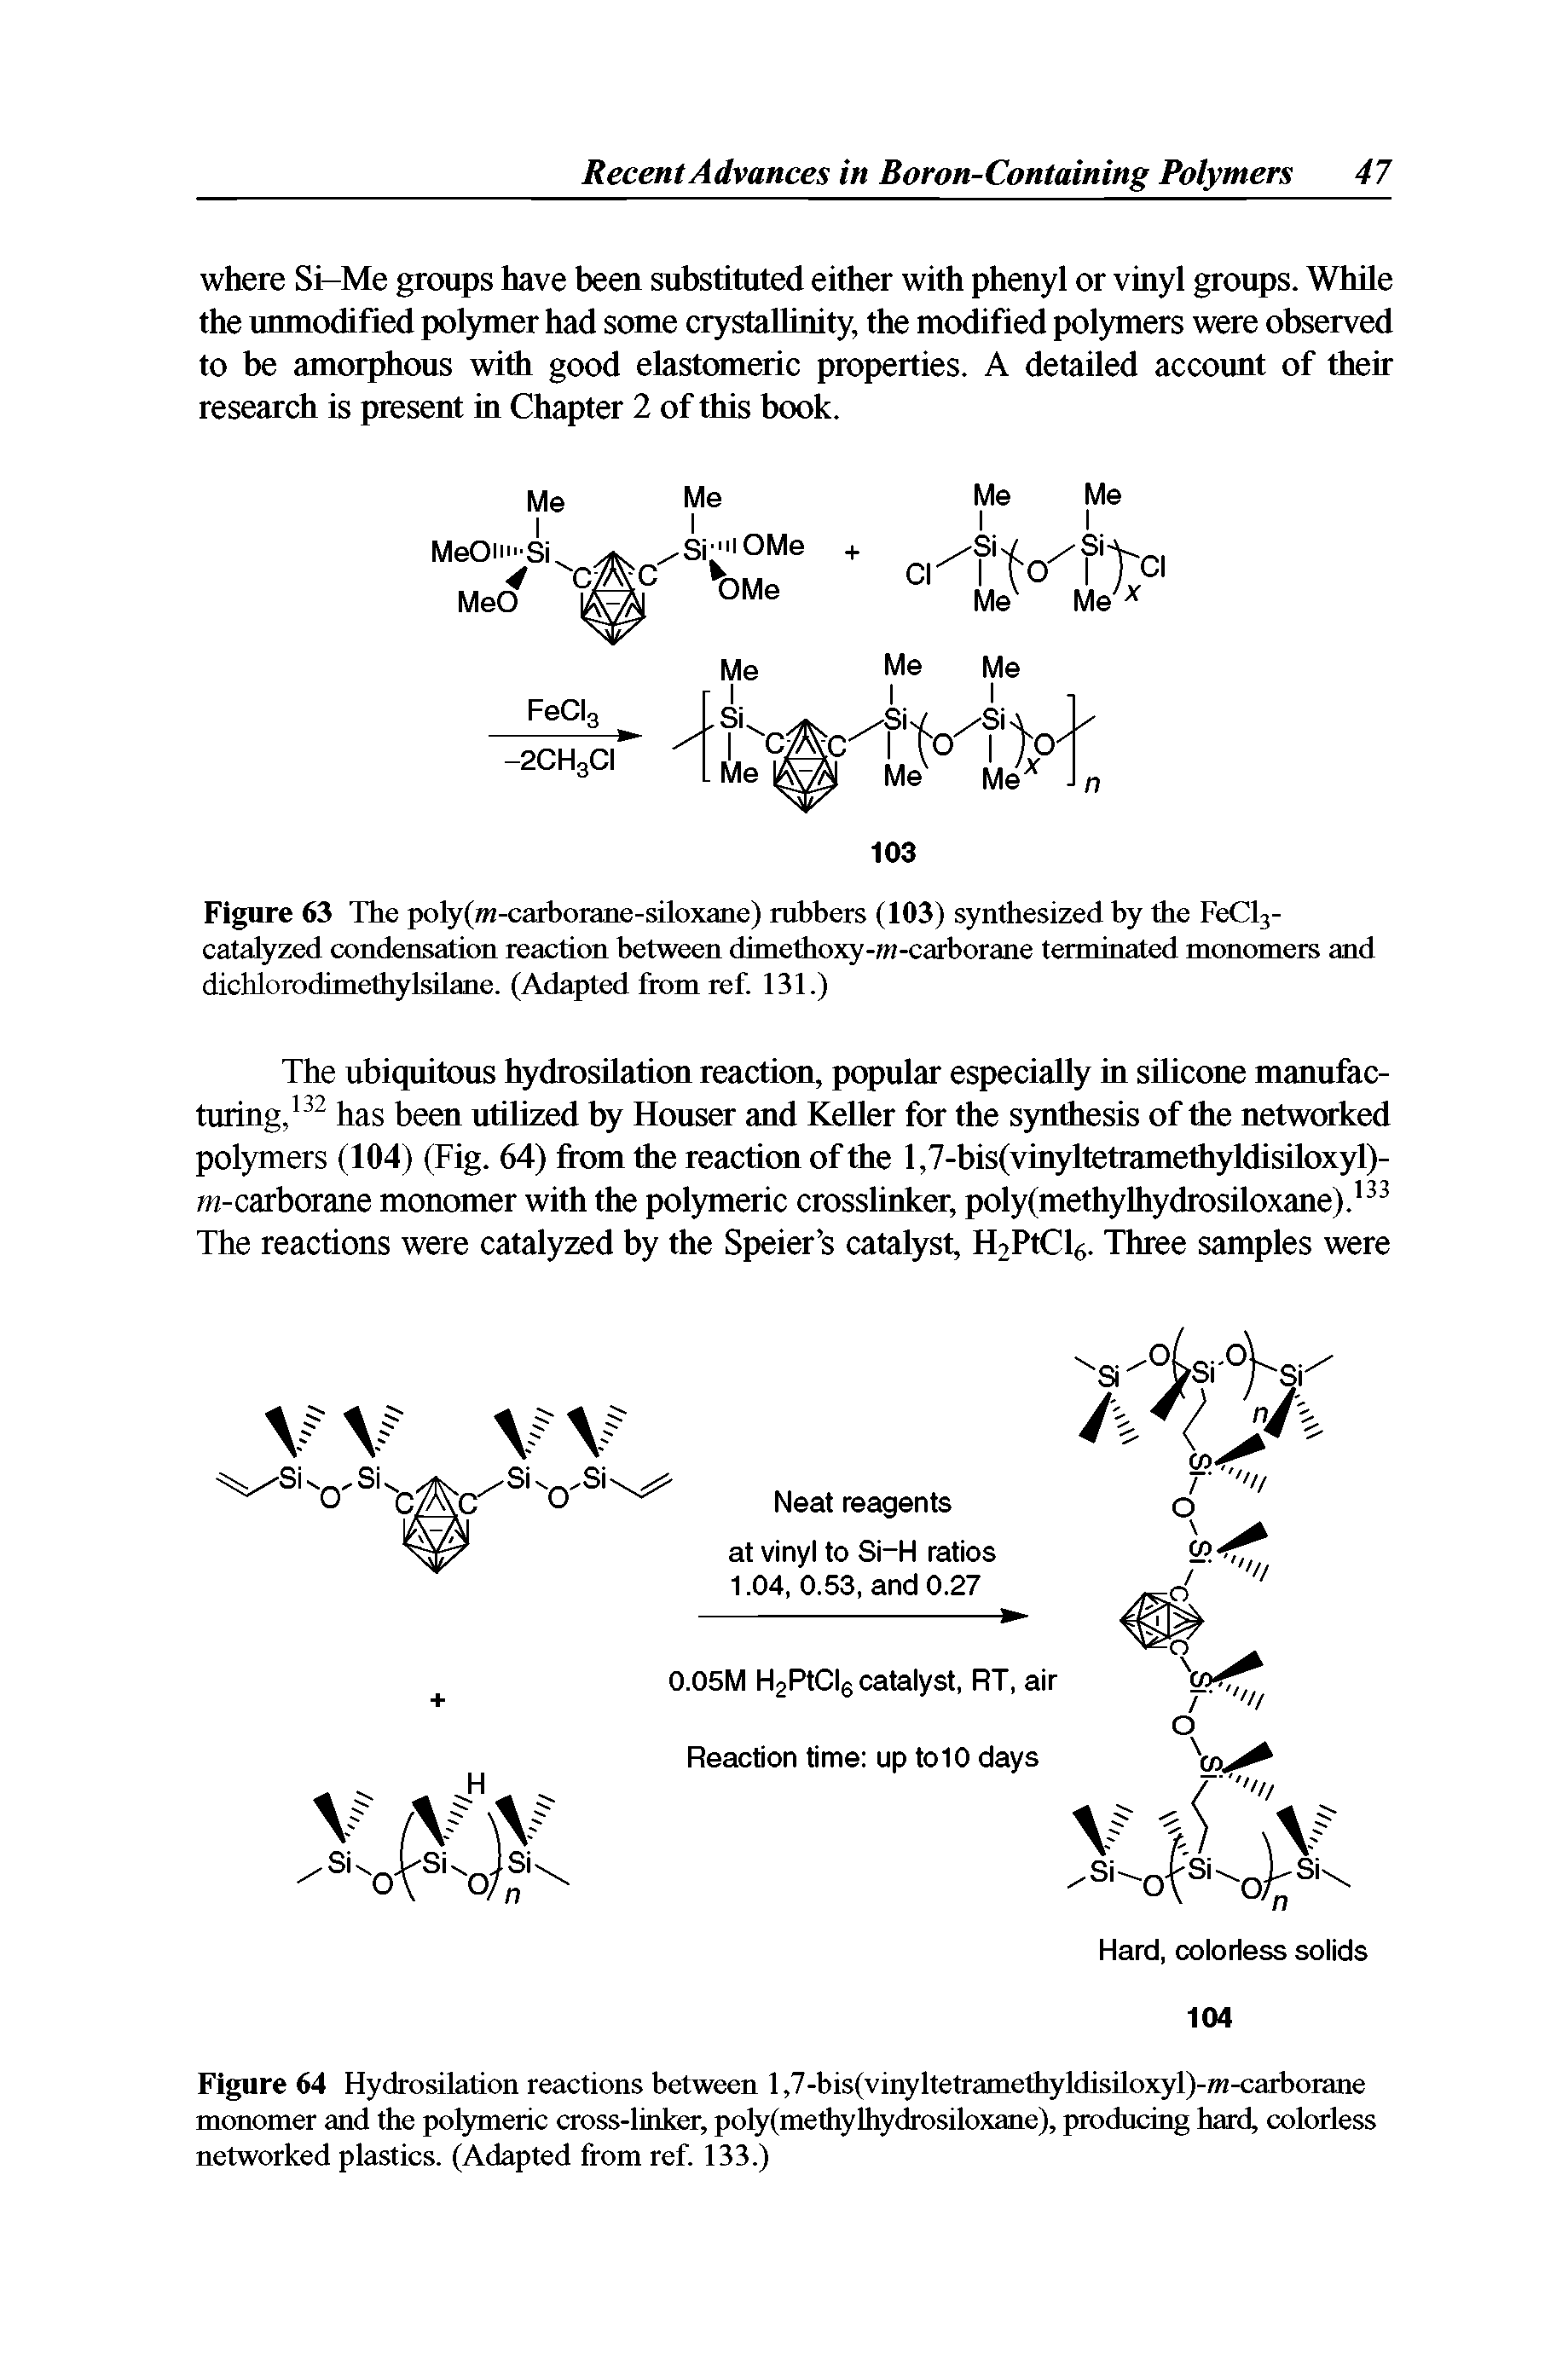 Figure 63 The poly(m-carborane-siloxane) rubbers (103) synthesized by the FeCl3-catalyzed condensation reaction between dimethoxy-m-carborane terminated monomers and dichlorodimethylsilane. (Adapted from ref. 131.)...